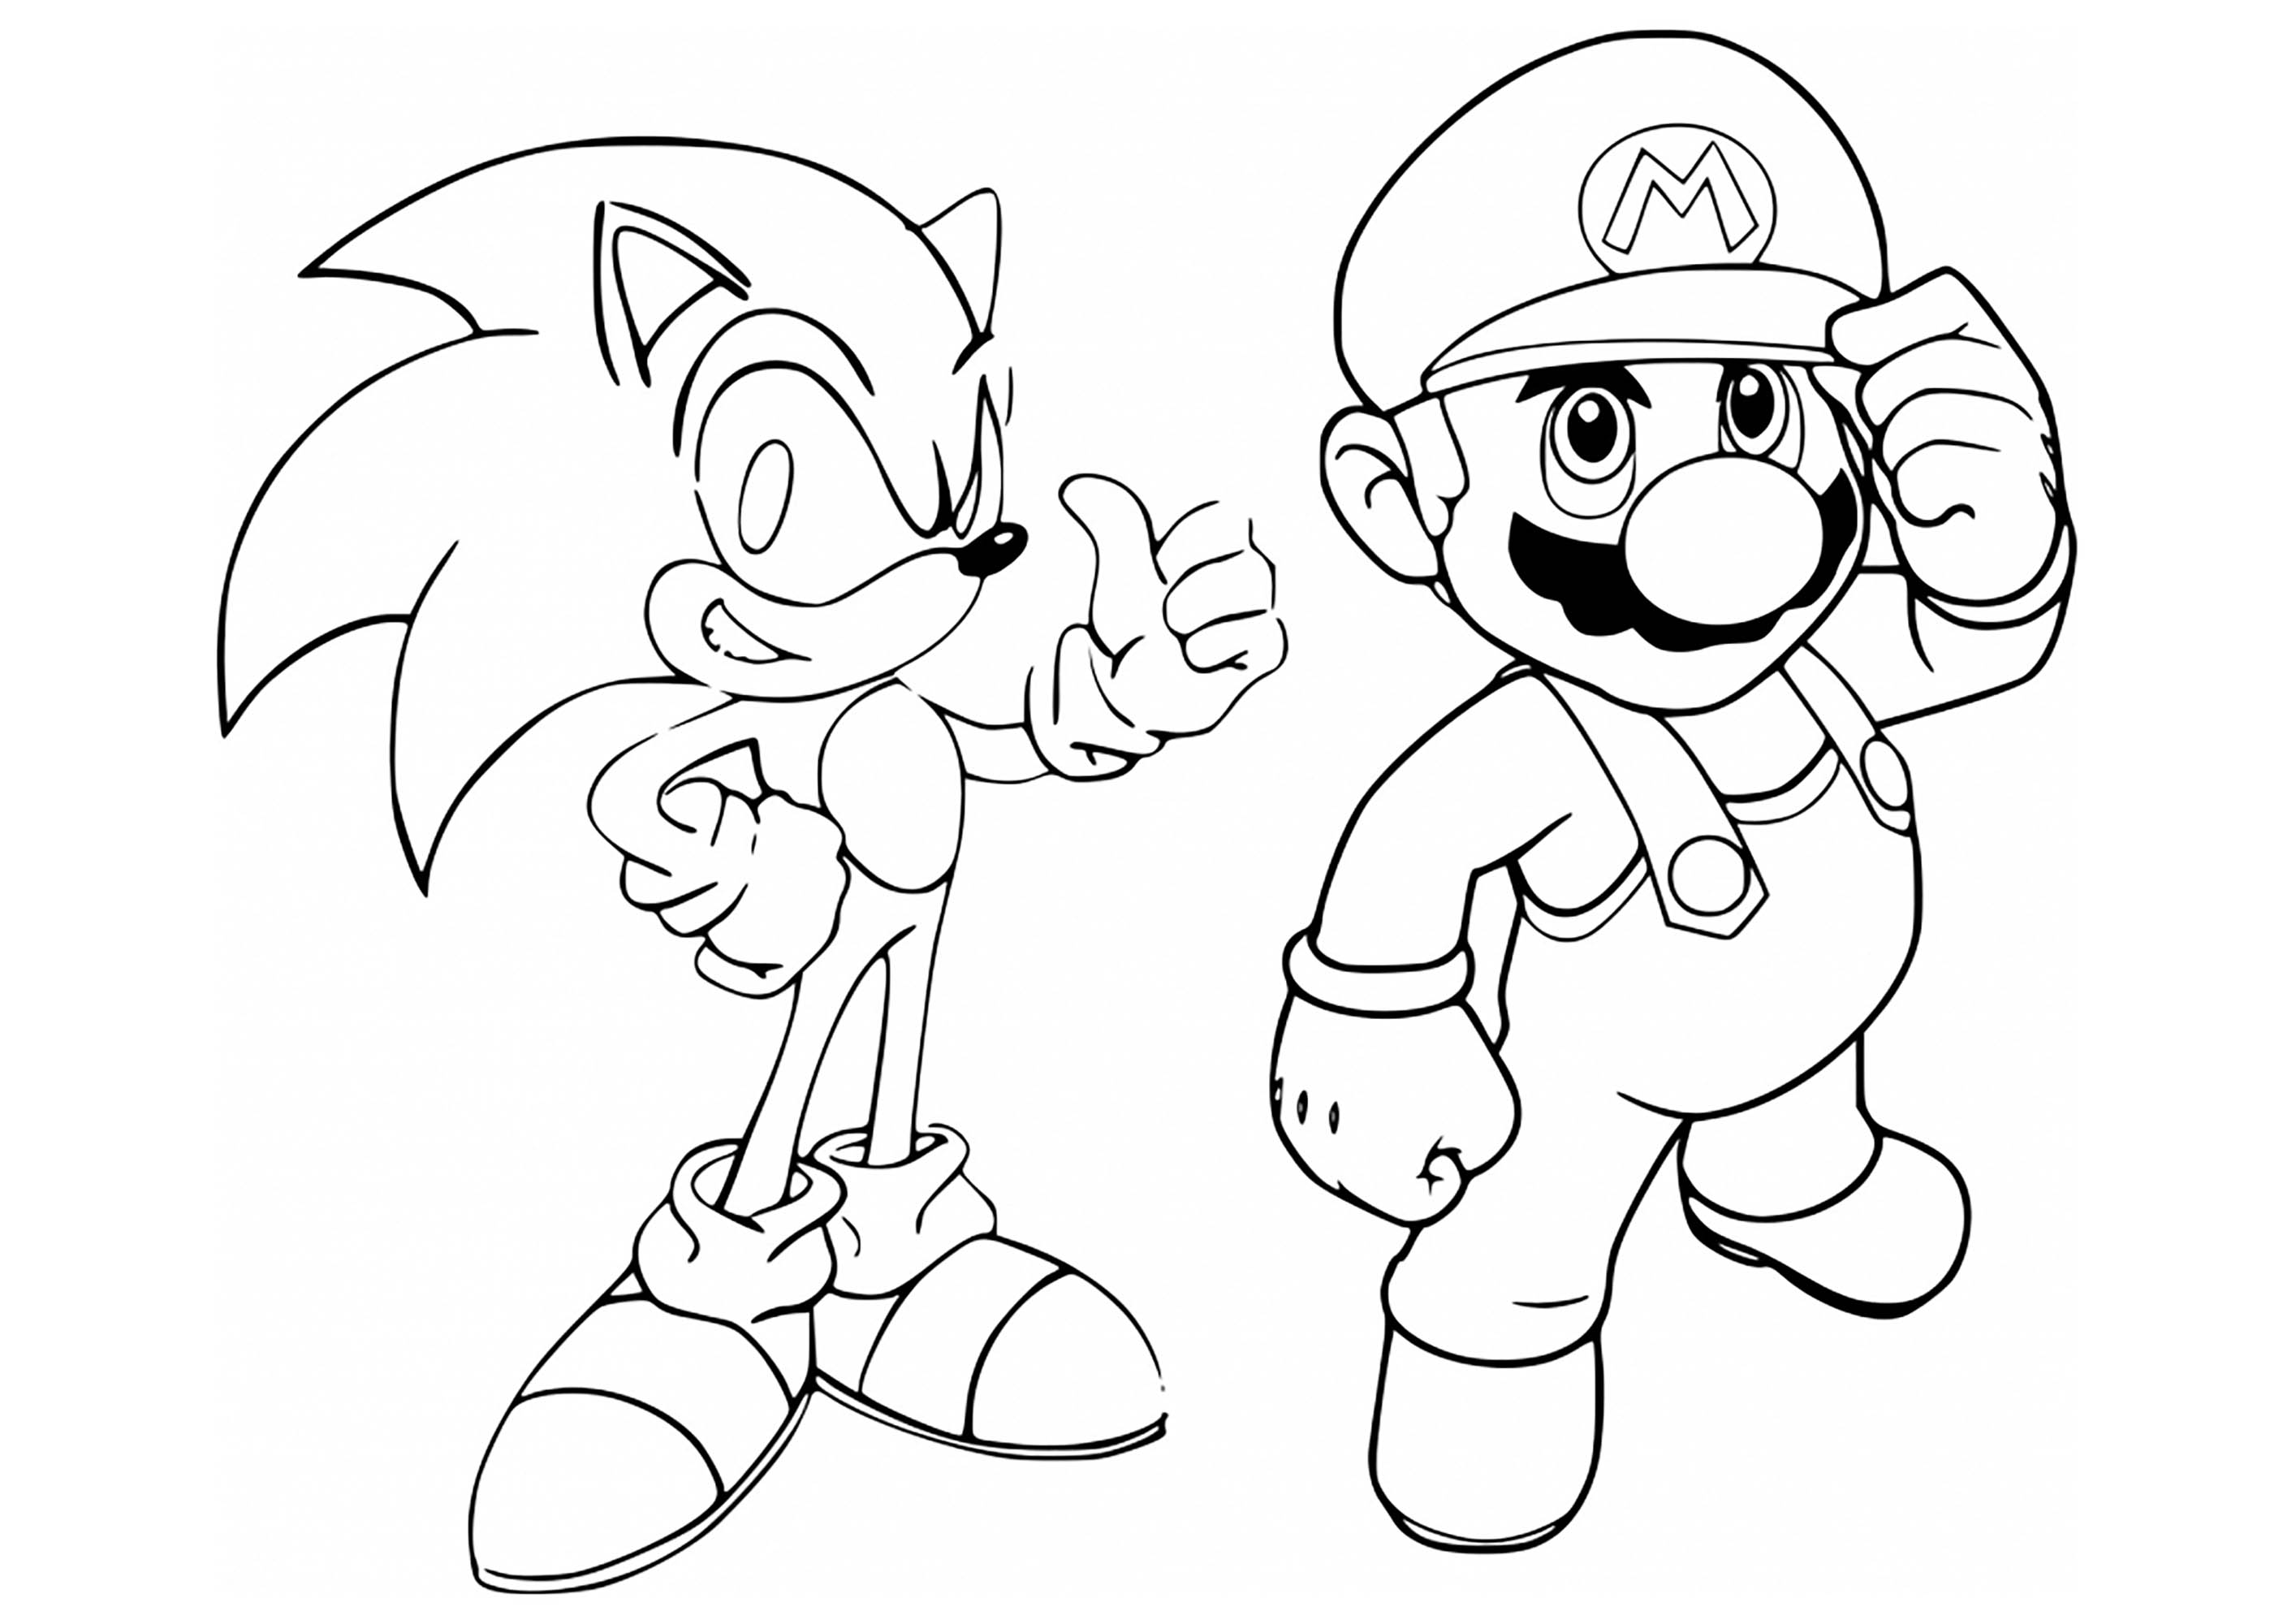 Download Sonic And Mario At The Olympic Games Tokyo Coloring Pages Super Mario Bros Coloring Pages Coloring Pages For Kids And Adults